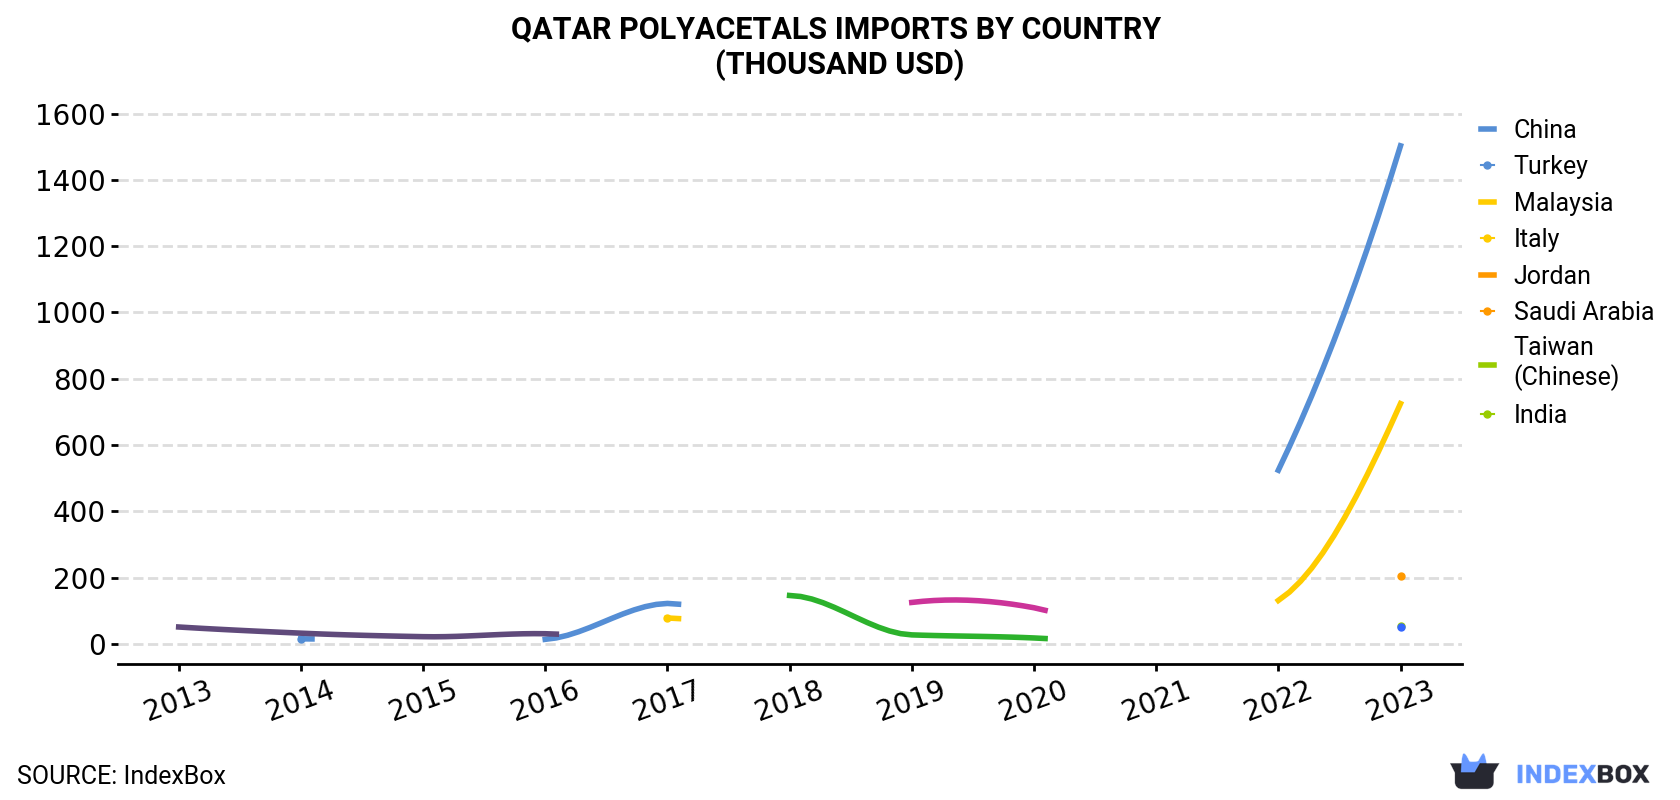 Qatar Polyacetals Imports By Country (Thousand USD)